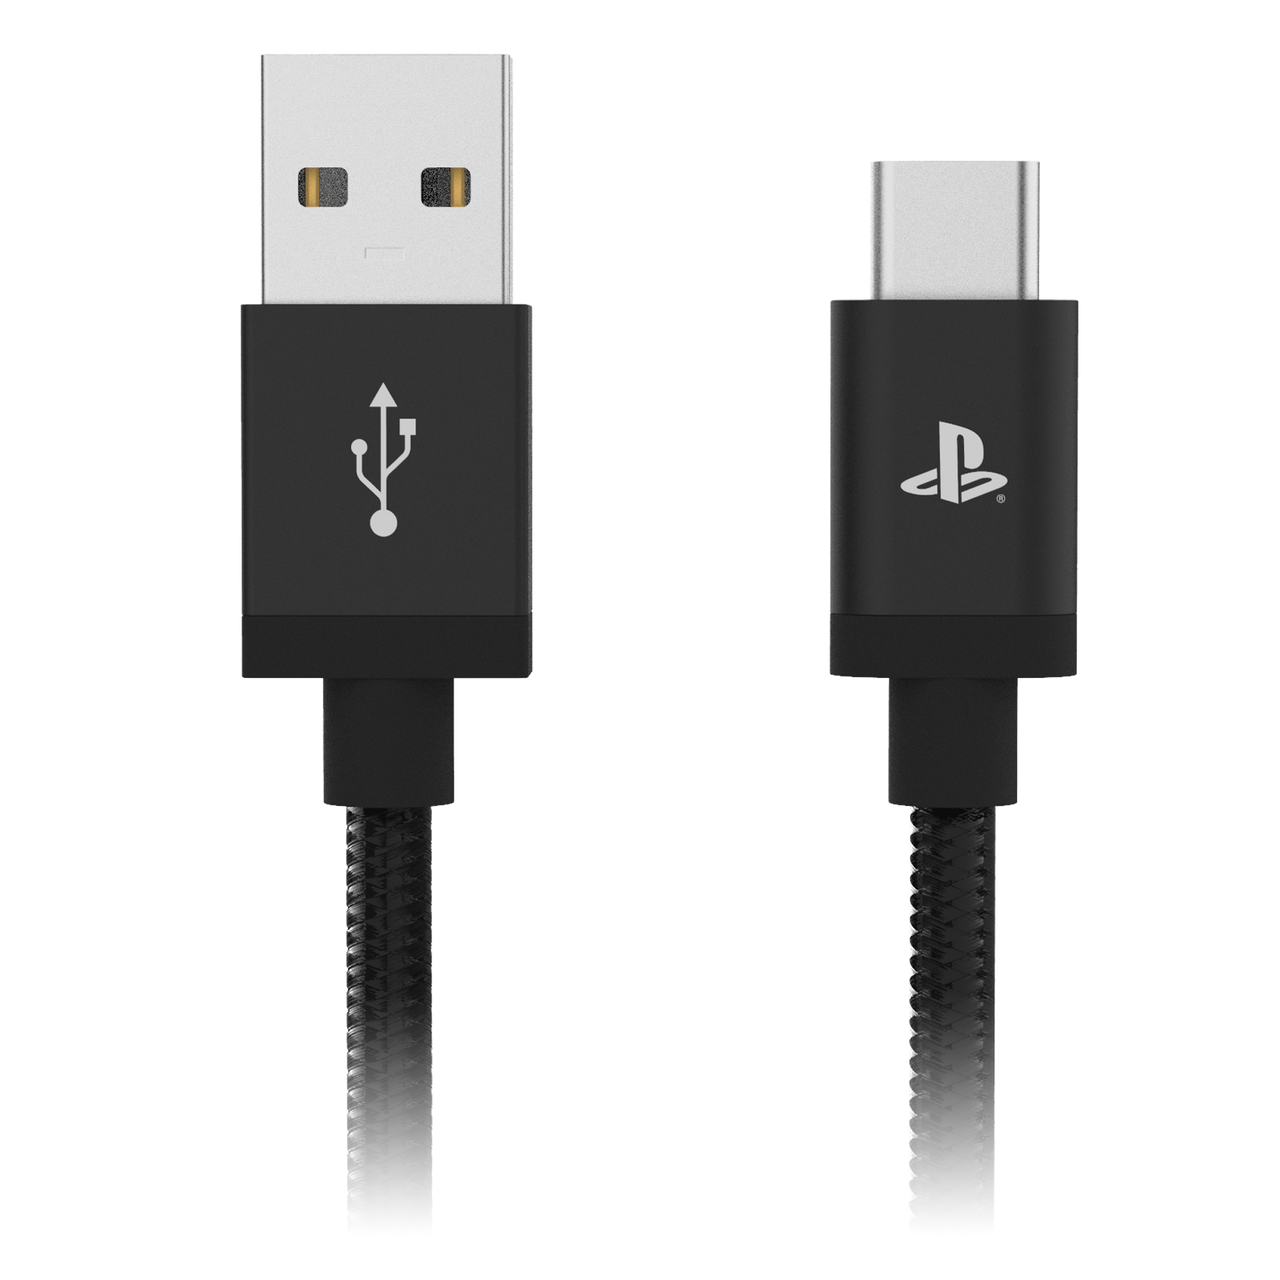 Hori PS5 USB Charge Cable